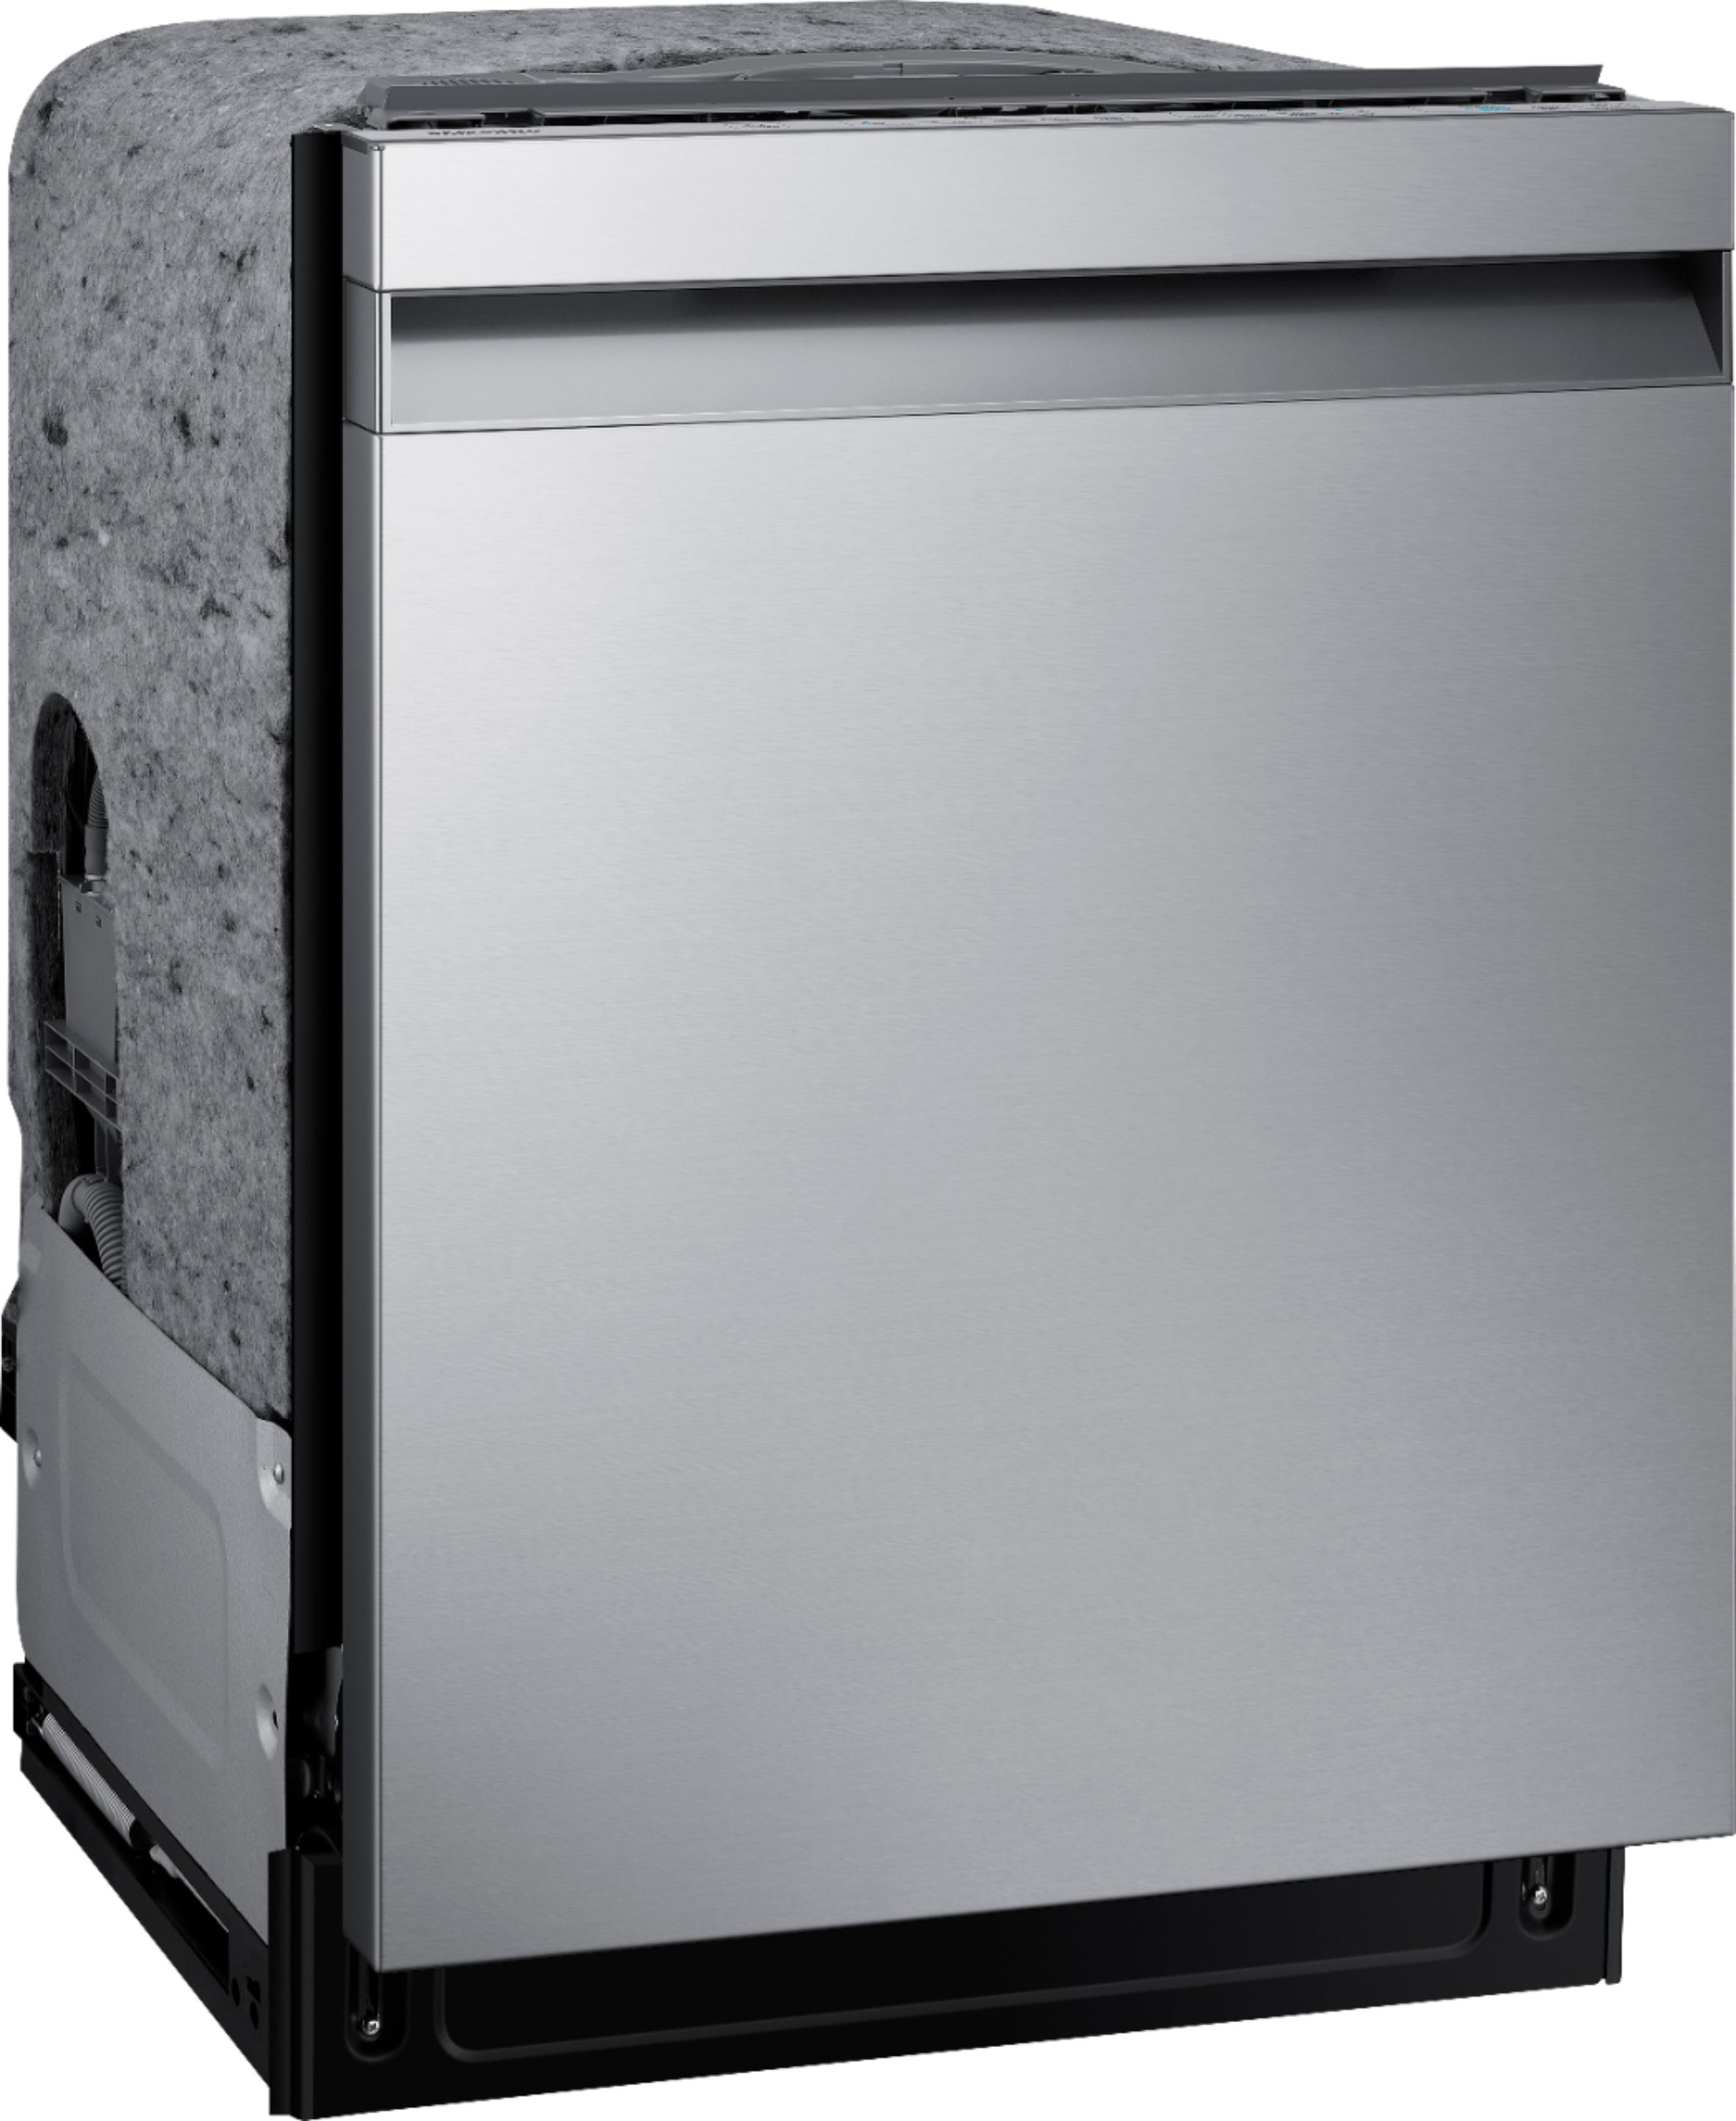 Angle View: KitchenAid - 24" Top Control Built-In Dishwasher with Stainless Steel Tub, FreeFlex, 3rd Rack, 44dBA - Stainless steel